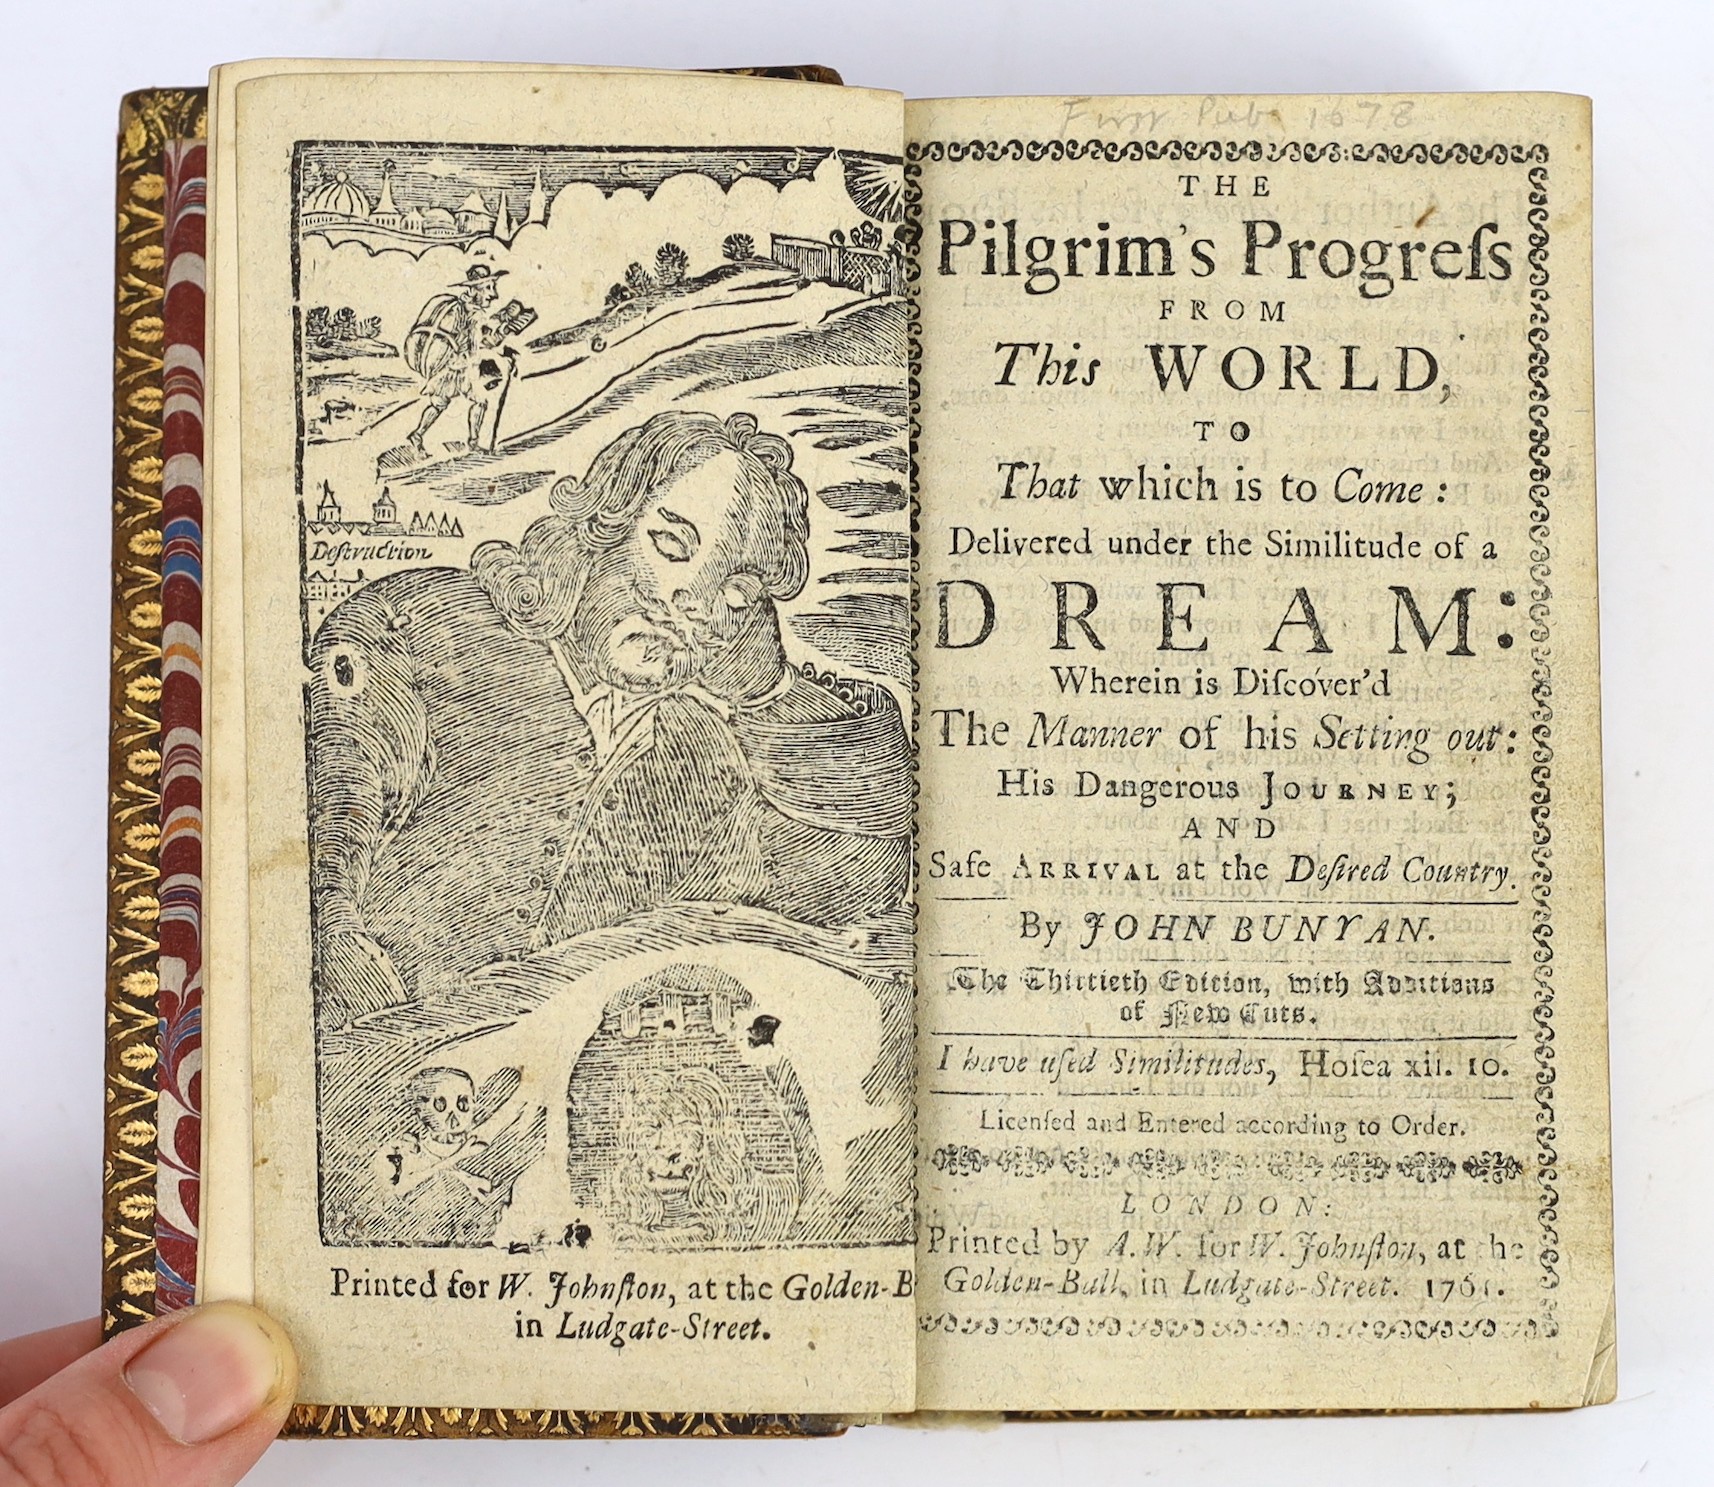 Bunyan, John - The Pilgrim's Progess from This World, to That which is to Come ... 3 Parts (& Life). 30th edition, with additions of new cuts ... 3 portrait frontispieces